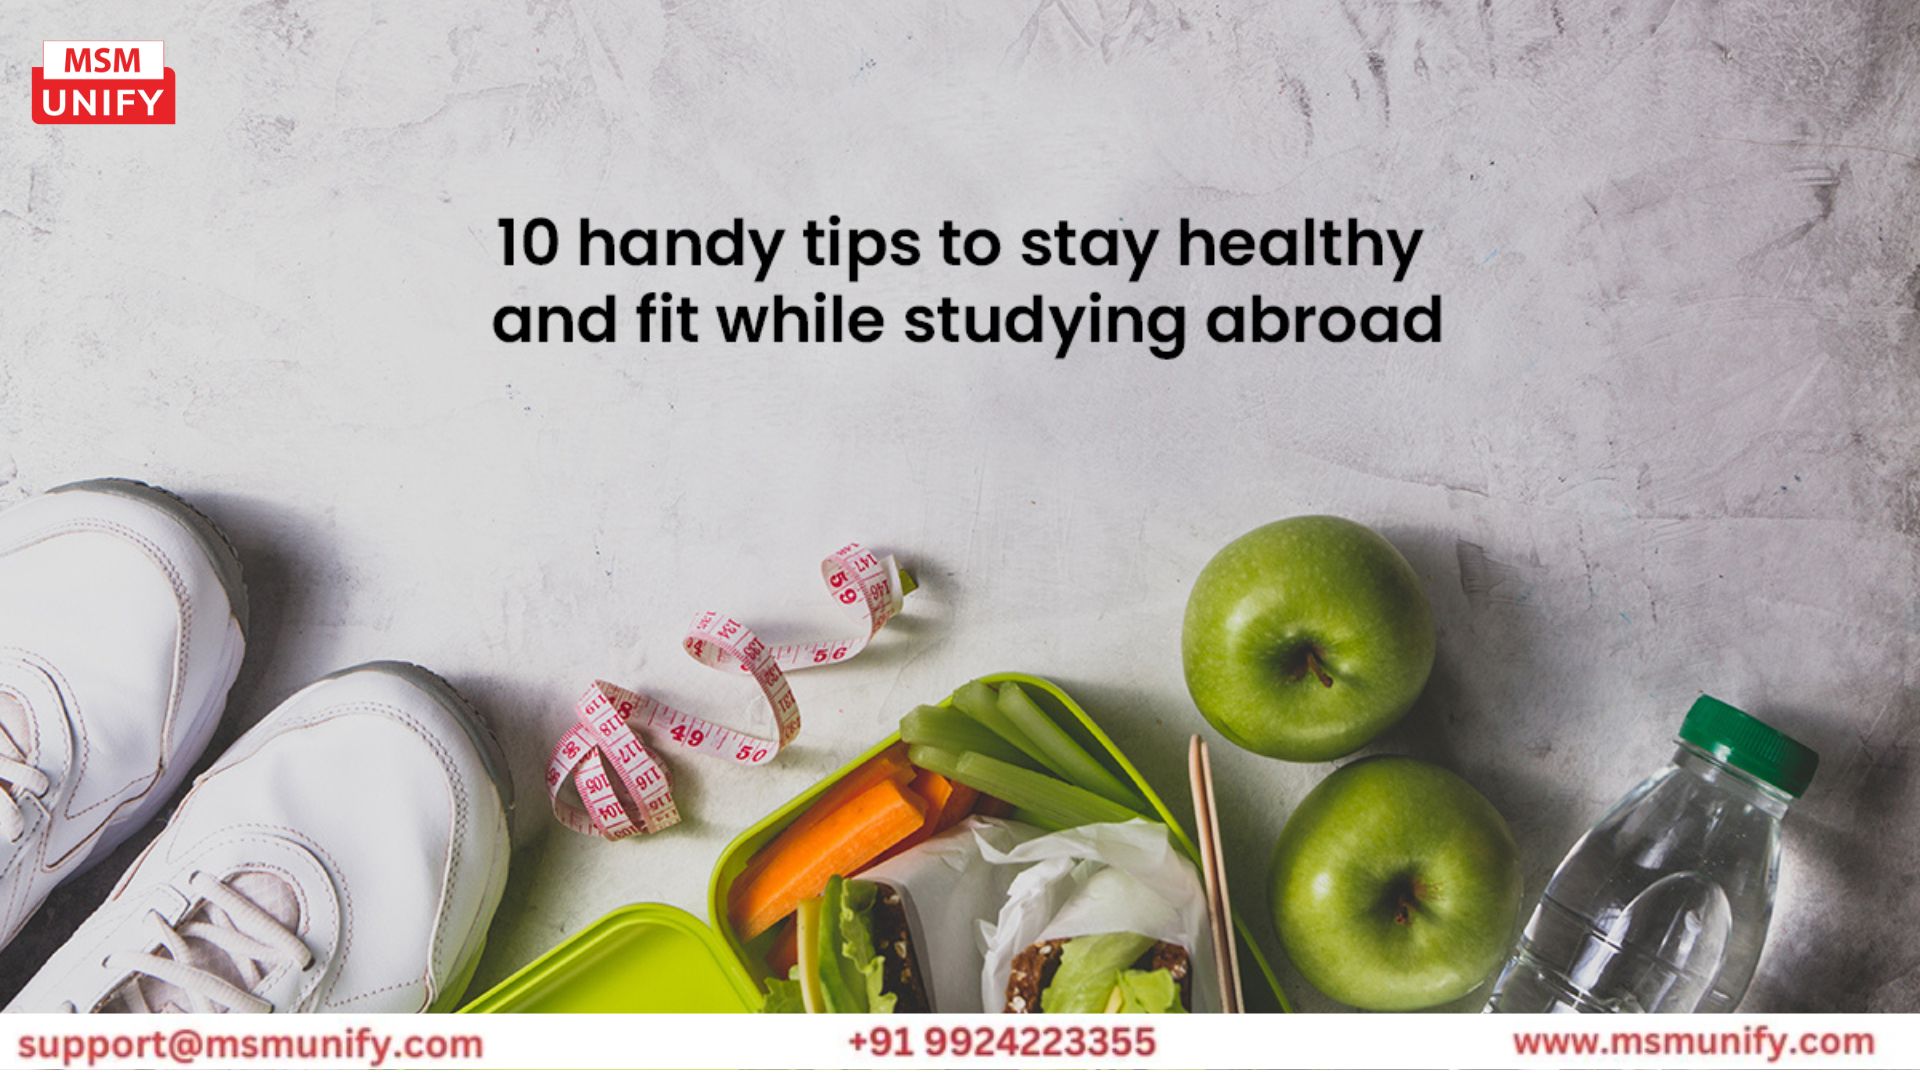 Elevate your study abroad experience with our insightful guide! Explore <a href="https://www.msmunify.com/blogs/10-handy-tips-to-stay-healthy-and-fit-while-studying-abroad/">10 ways to stay healthy and fit</a> to maintain a healthy lifestyle while pursuing education overseas. From mindful meals to invigorating exercises, discover the keys to balance. 

